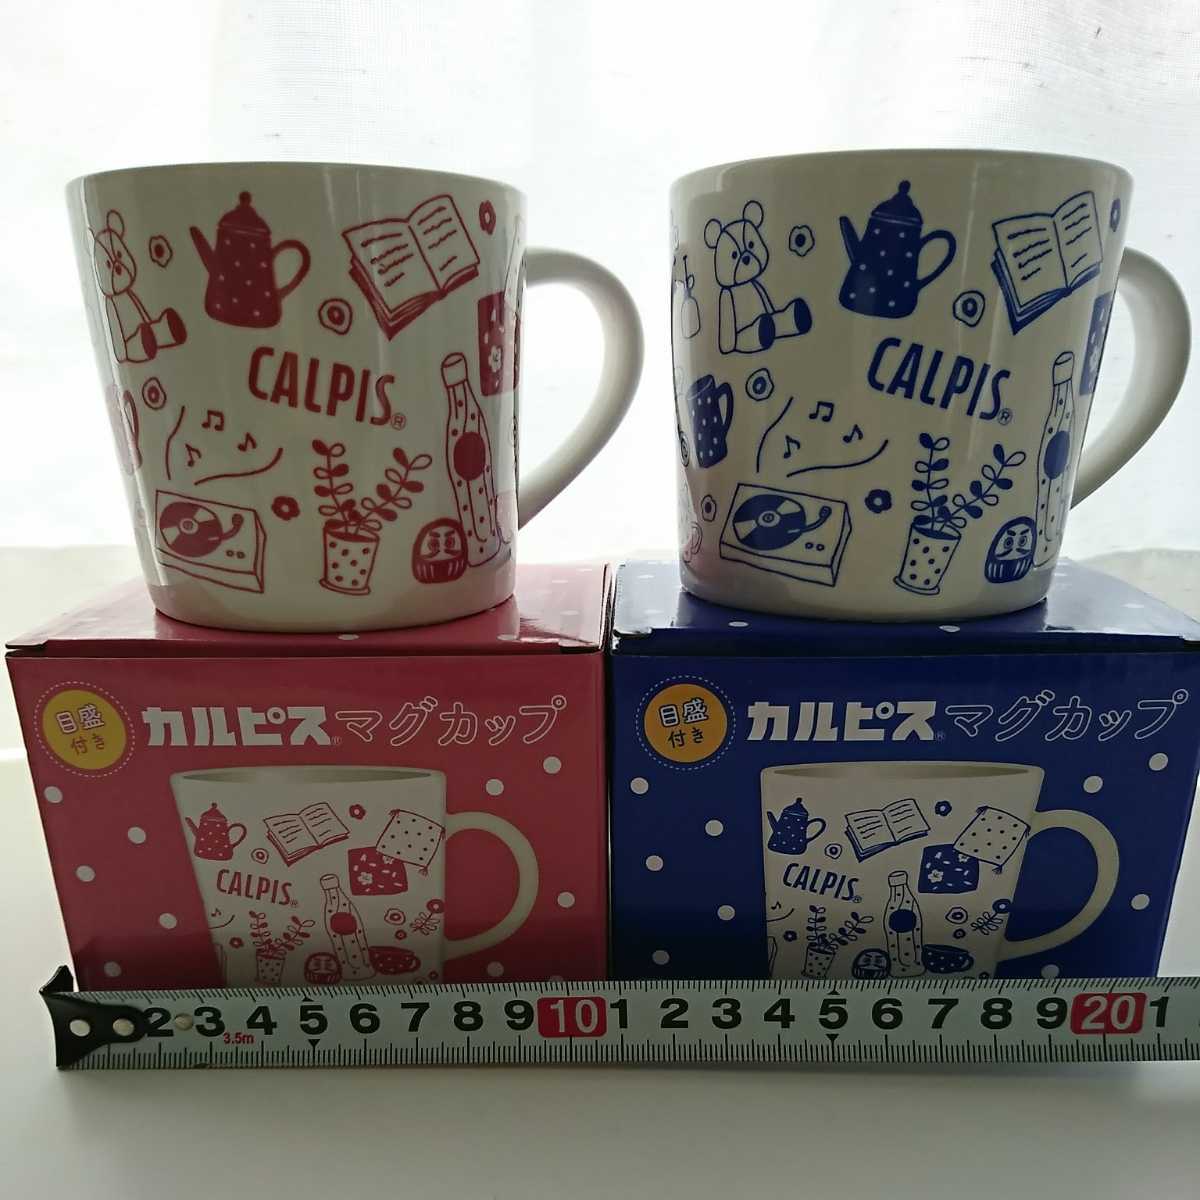 2 piece set [ prompt decision immediate bid ] new goods unused *karupis mug scale attaching pink & blue * hot pair mug Novelty # not for sale ①